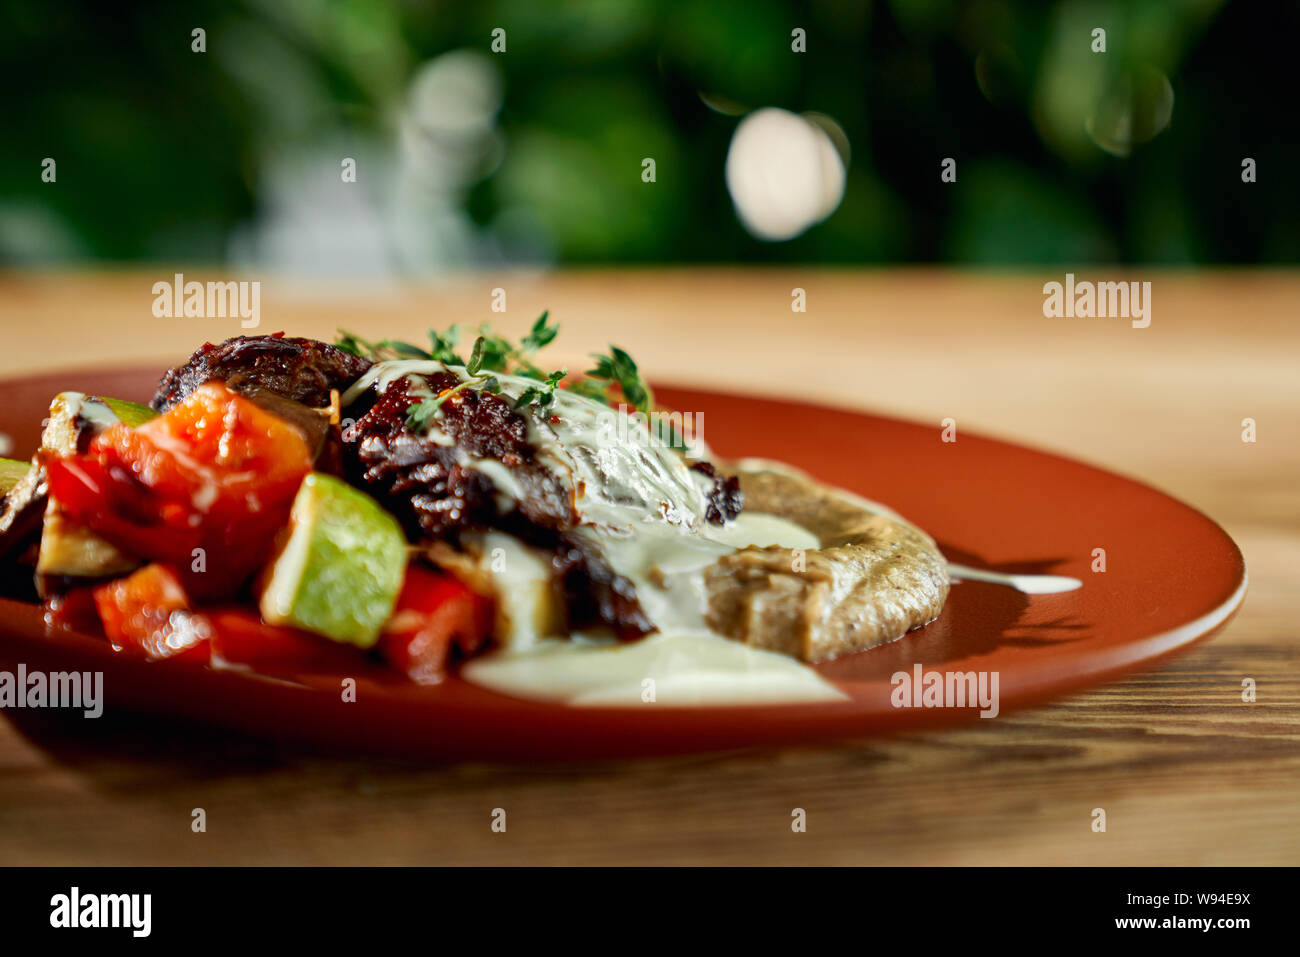 selective focus of delicious juicy meat with garnish and grilled vegetables on plate in restaurant. Healthy meal with marrows and tomatoes staying on table. Concept of dinner and cuisine. Stock Photo